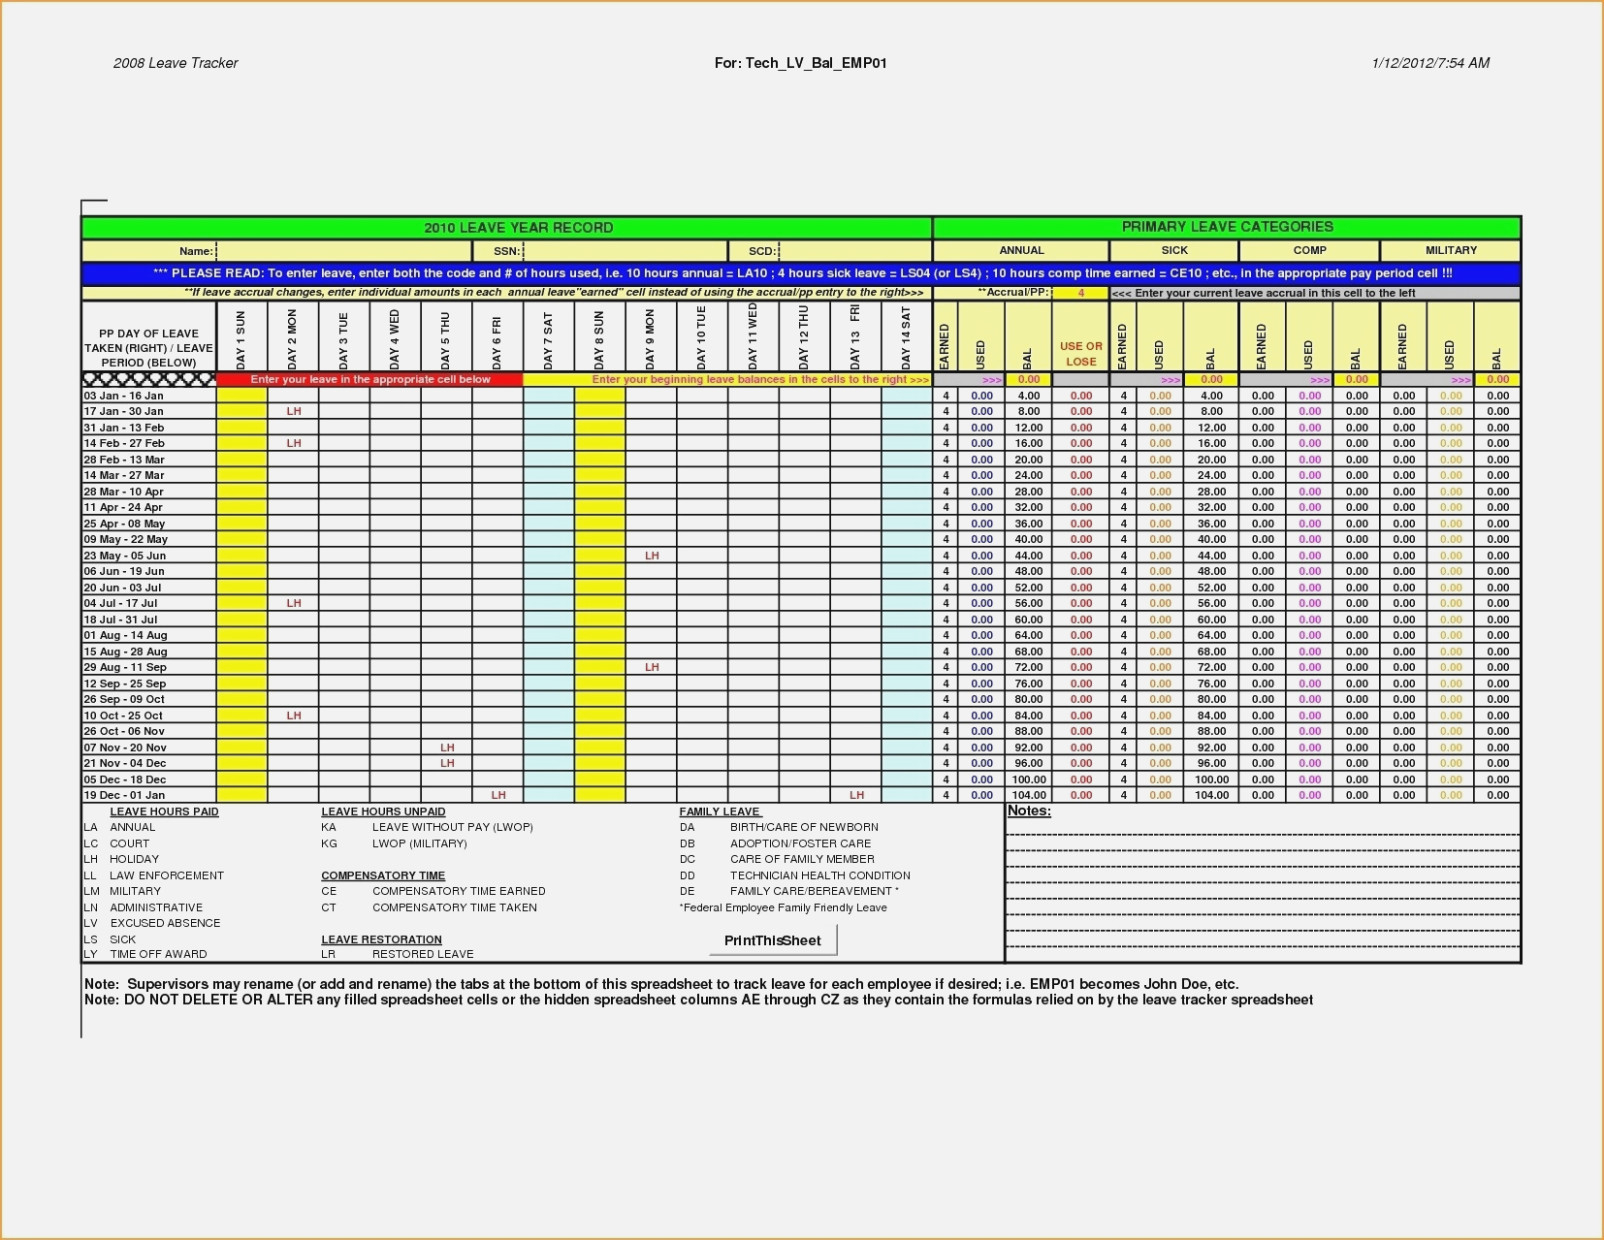 Comp Time Tracking Spreadsheet Download Spreadsheet Downloa comp time